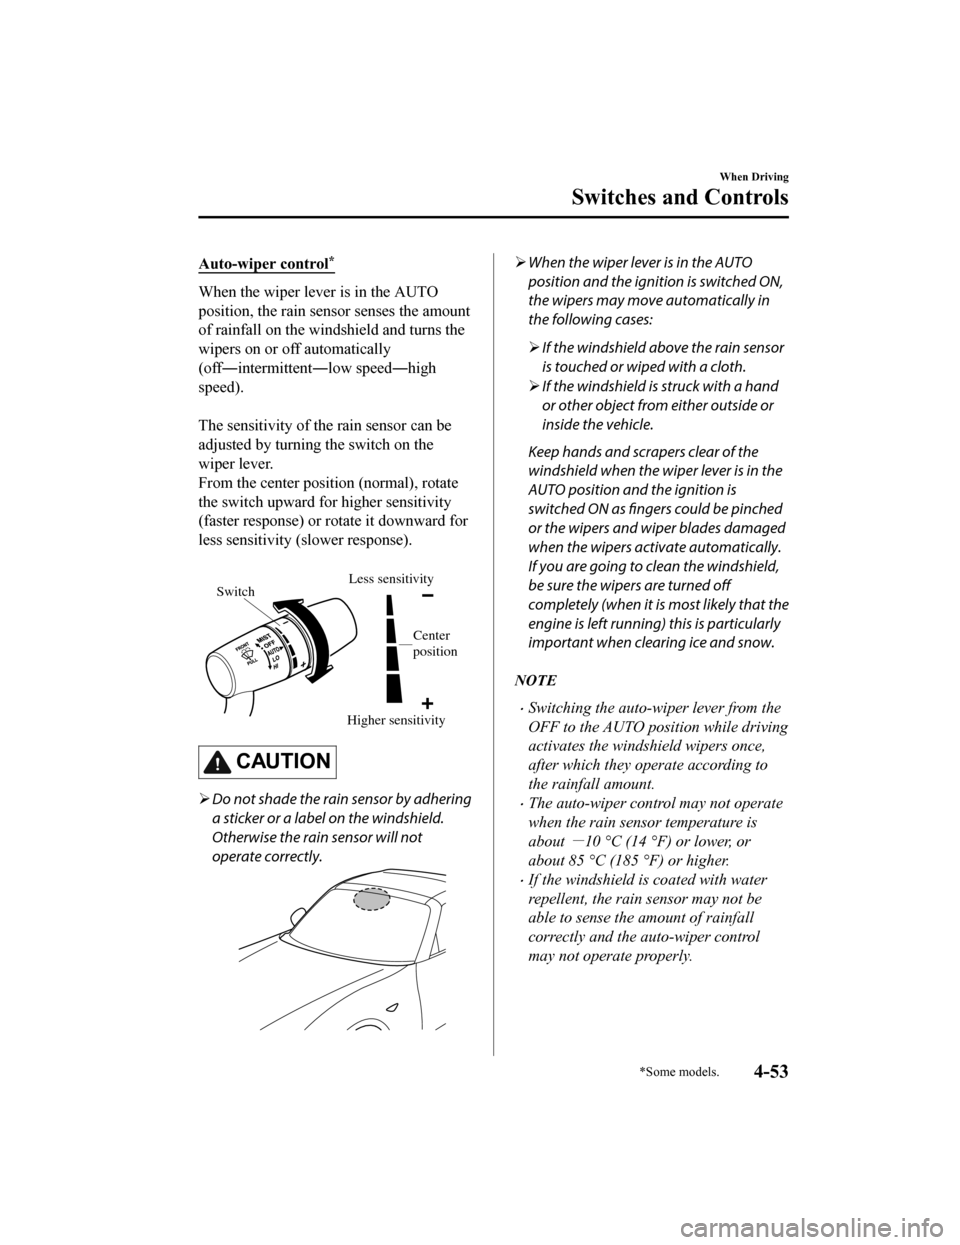 MAZDA MODEL MX-5 2020  Owners Manual (in English) Auto-wiper control*
When the wiper lever is in the AUTO
position, the rain sensor senses the amount
of rainfall on the windshield and turns the
wipers on or off automatically
(off―intermittent―low